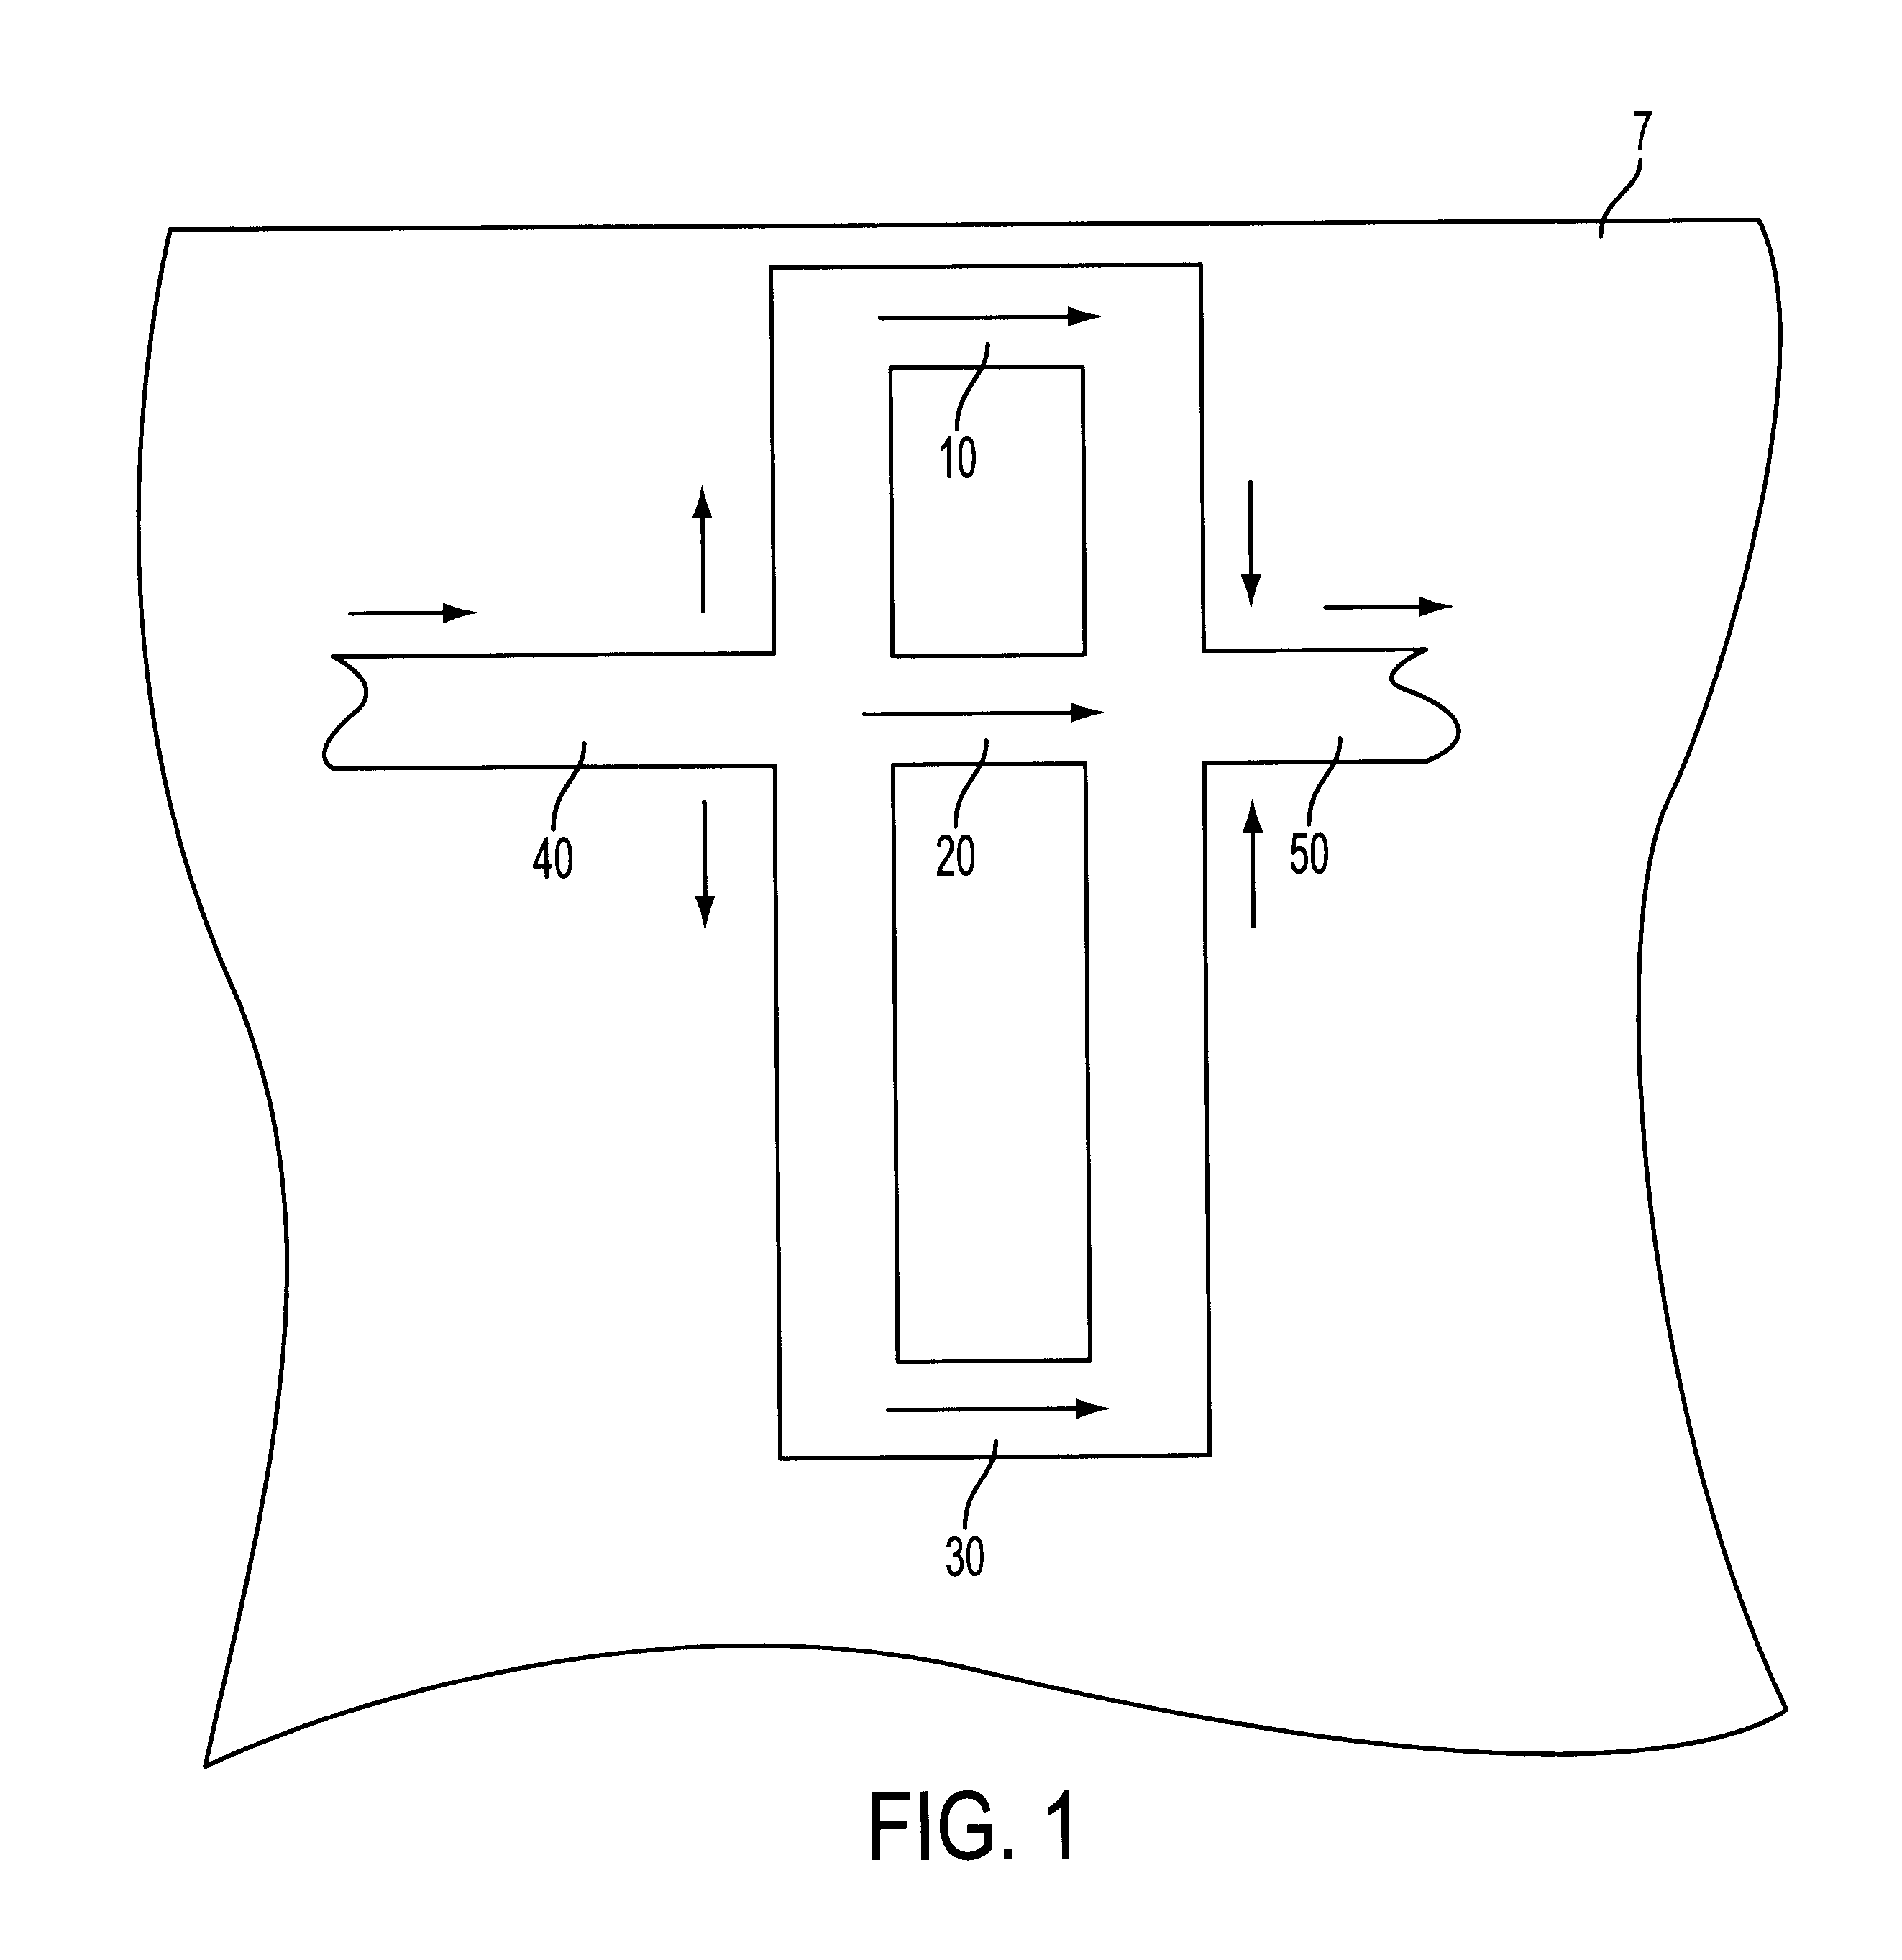 Method and apparatus for reducing signal timing skew on a printed circuit board